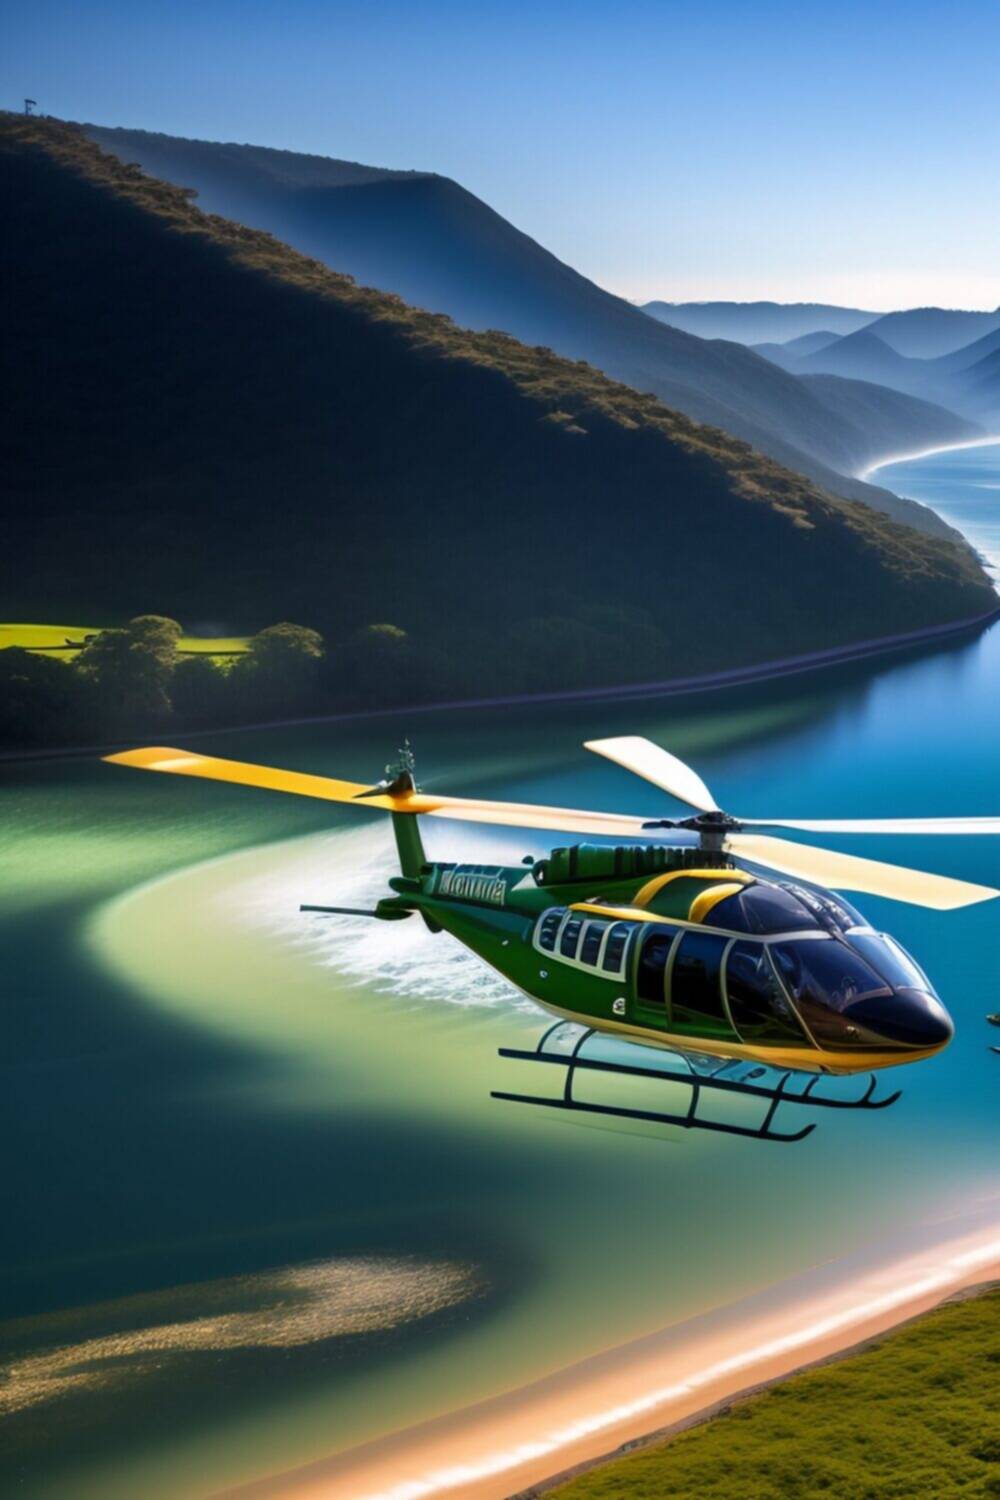 Budget Locations For Scenic Helicopter Tours